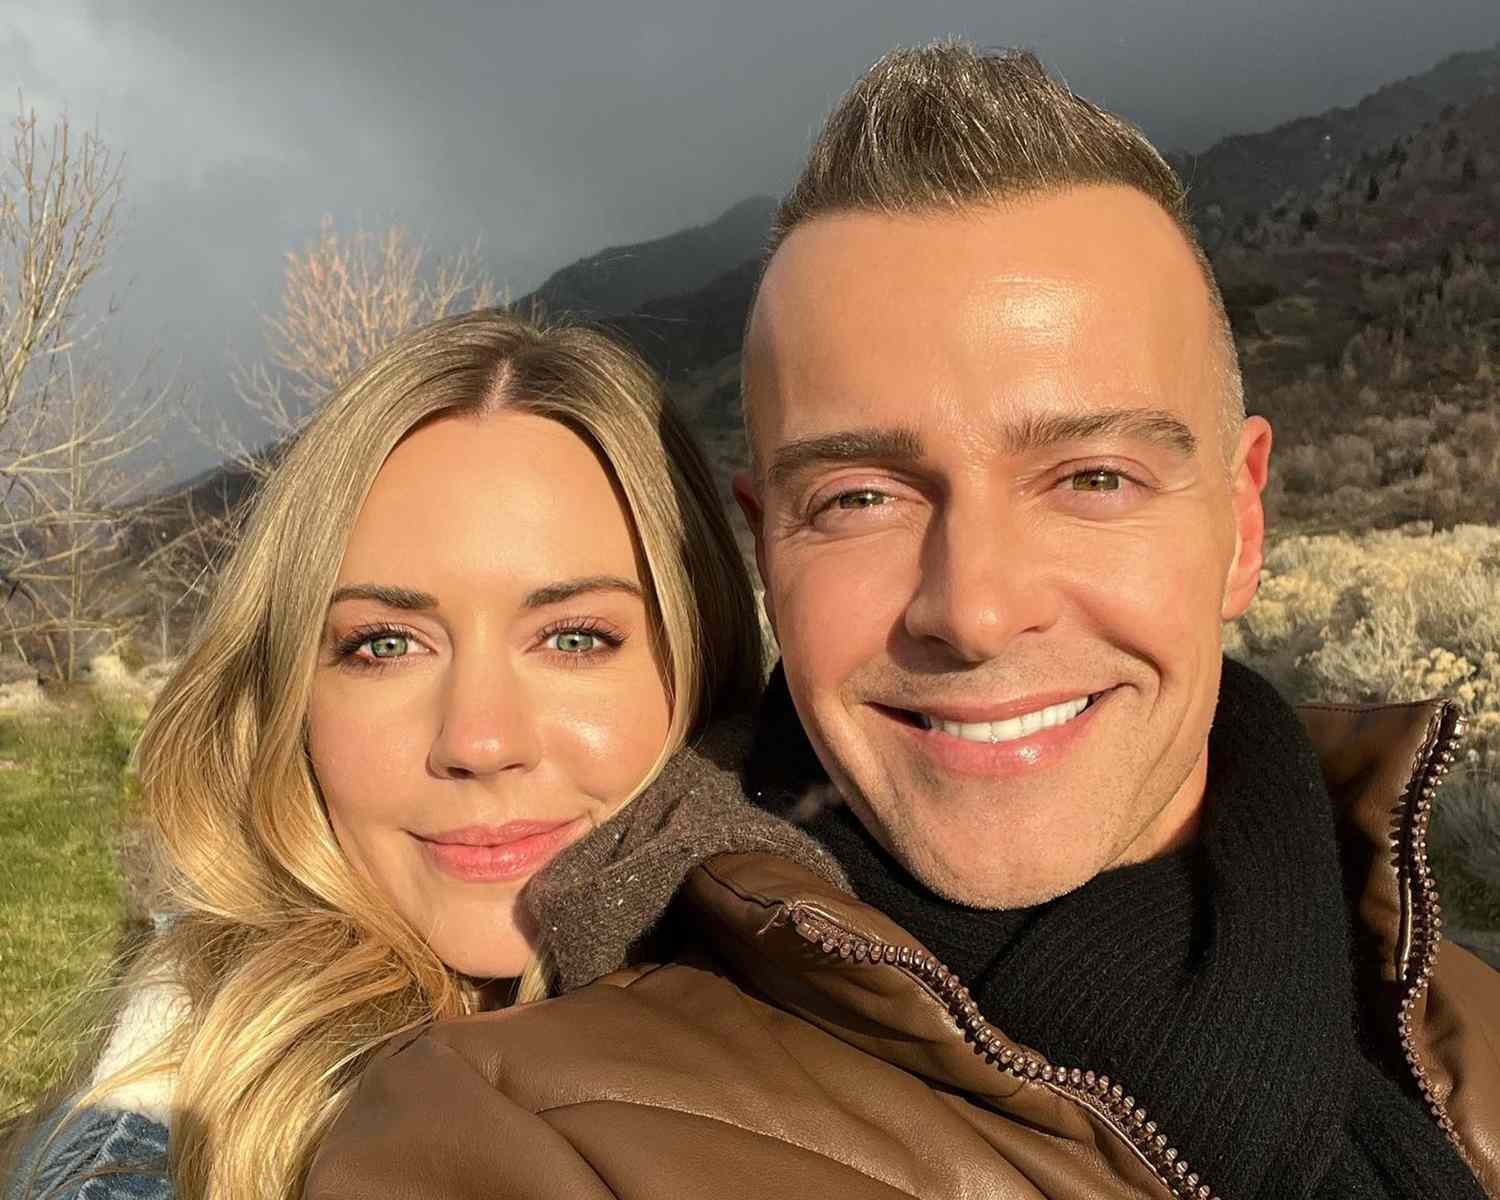 Joey Lawrence and Samantha Cope Welcome Baby Girl